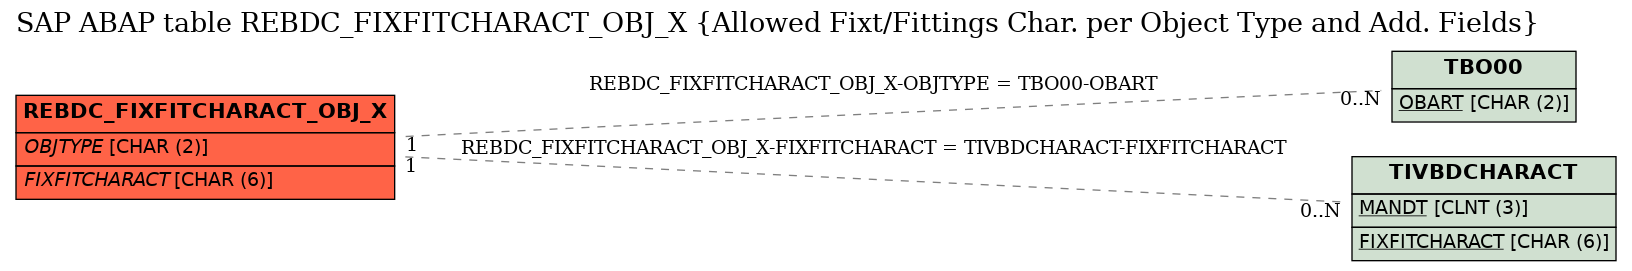 E-R Diagram for table REBDC_FIXFITCHARACT_OBJ_X (Allowed Fixt/Fittings Char. per Object Type and Add. Fields)